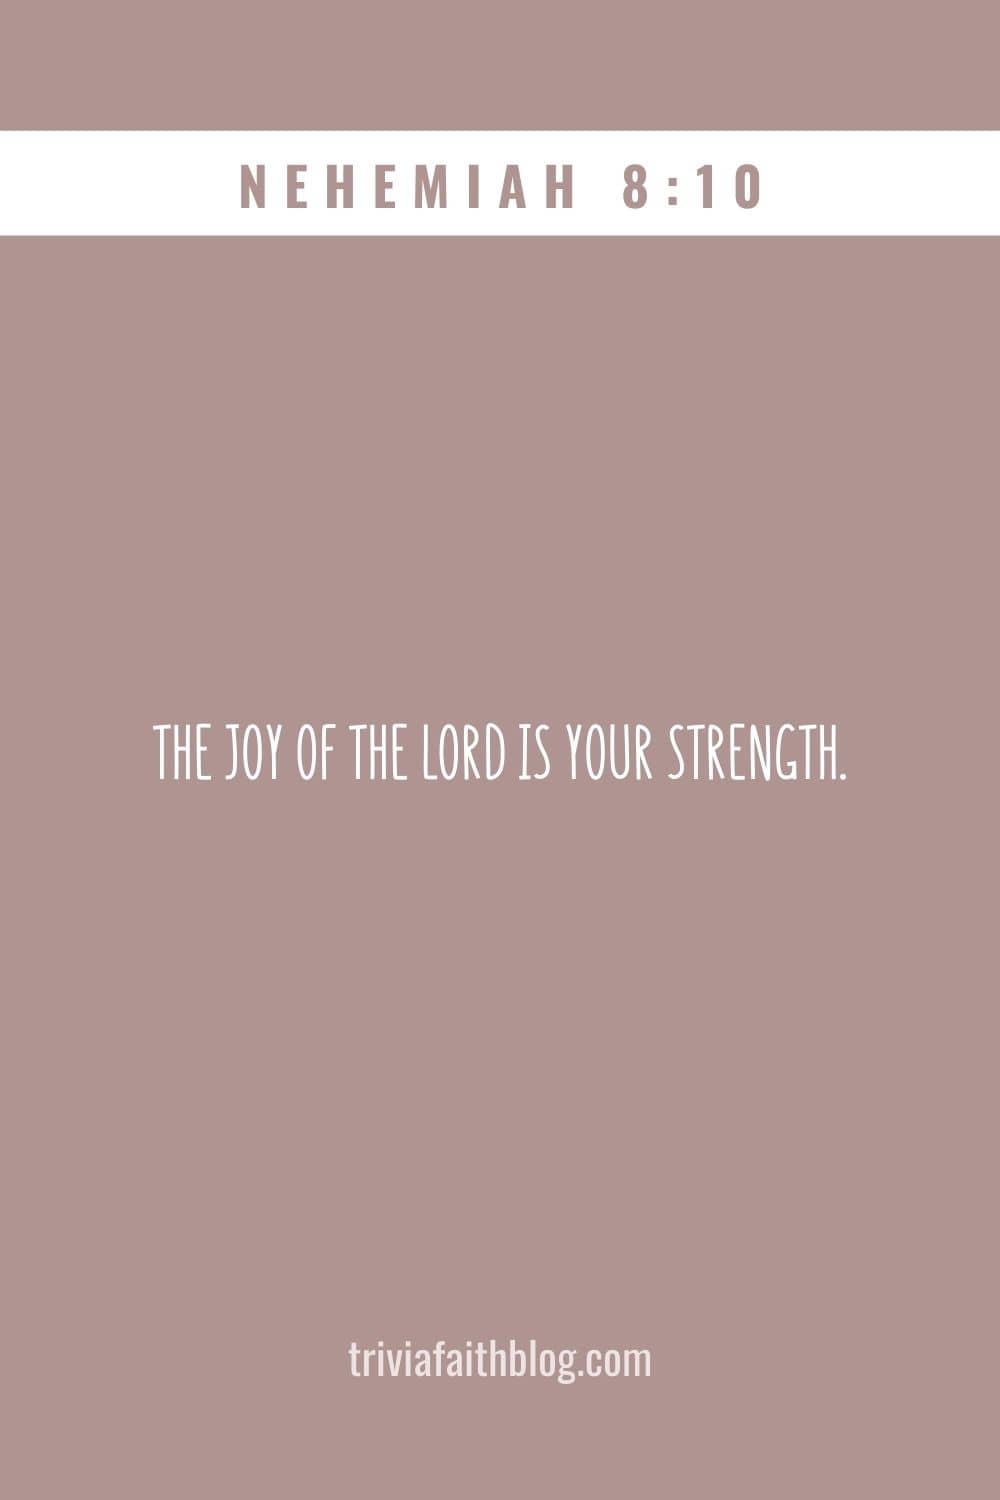 The joy of the LORD is your strength